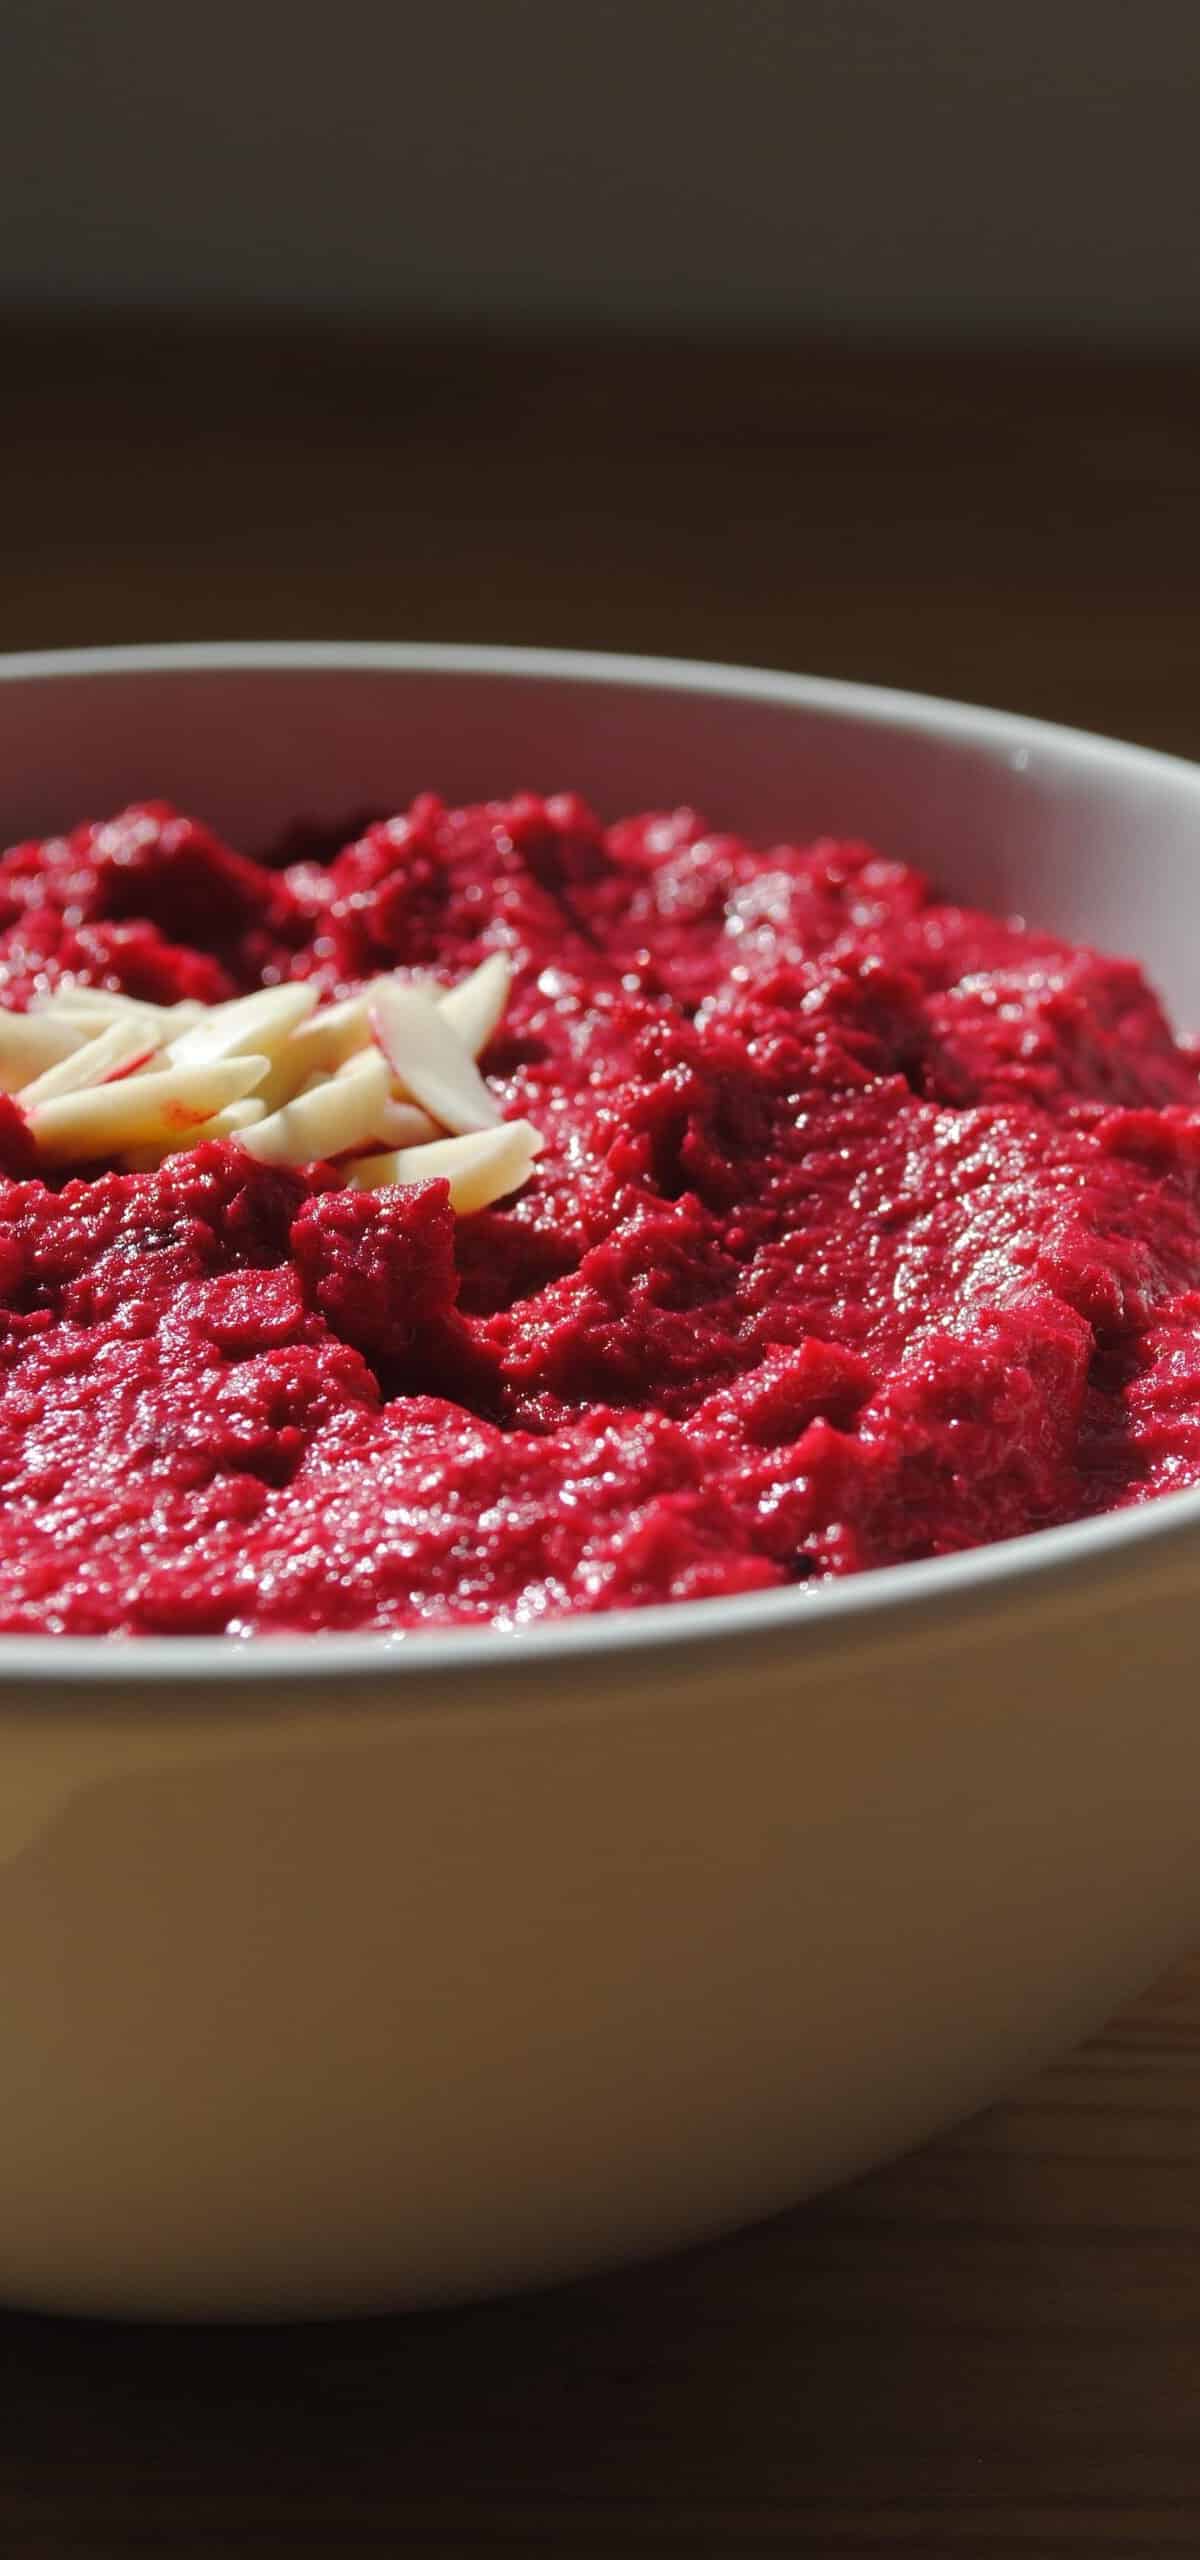  Elevate your snack game with this protein-packed beet and almond dip.